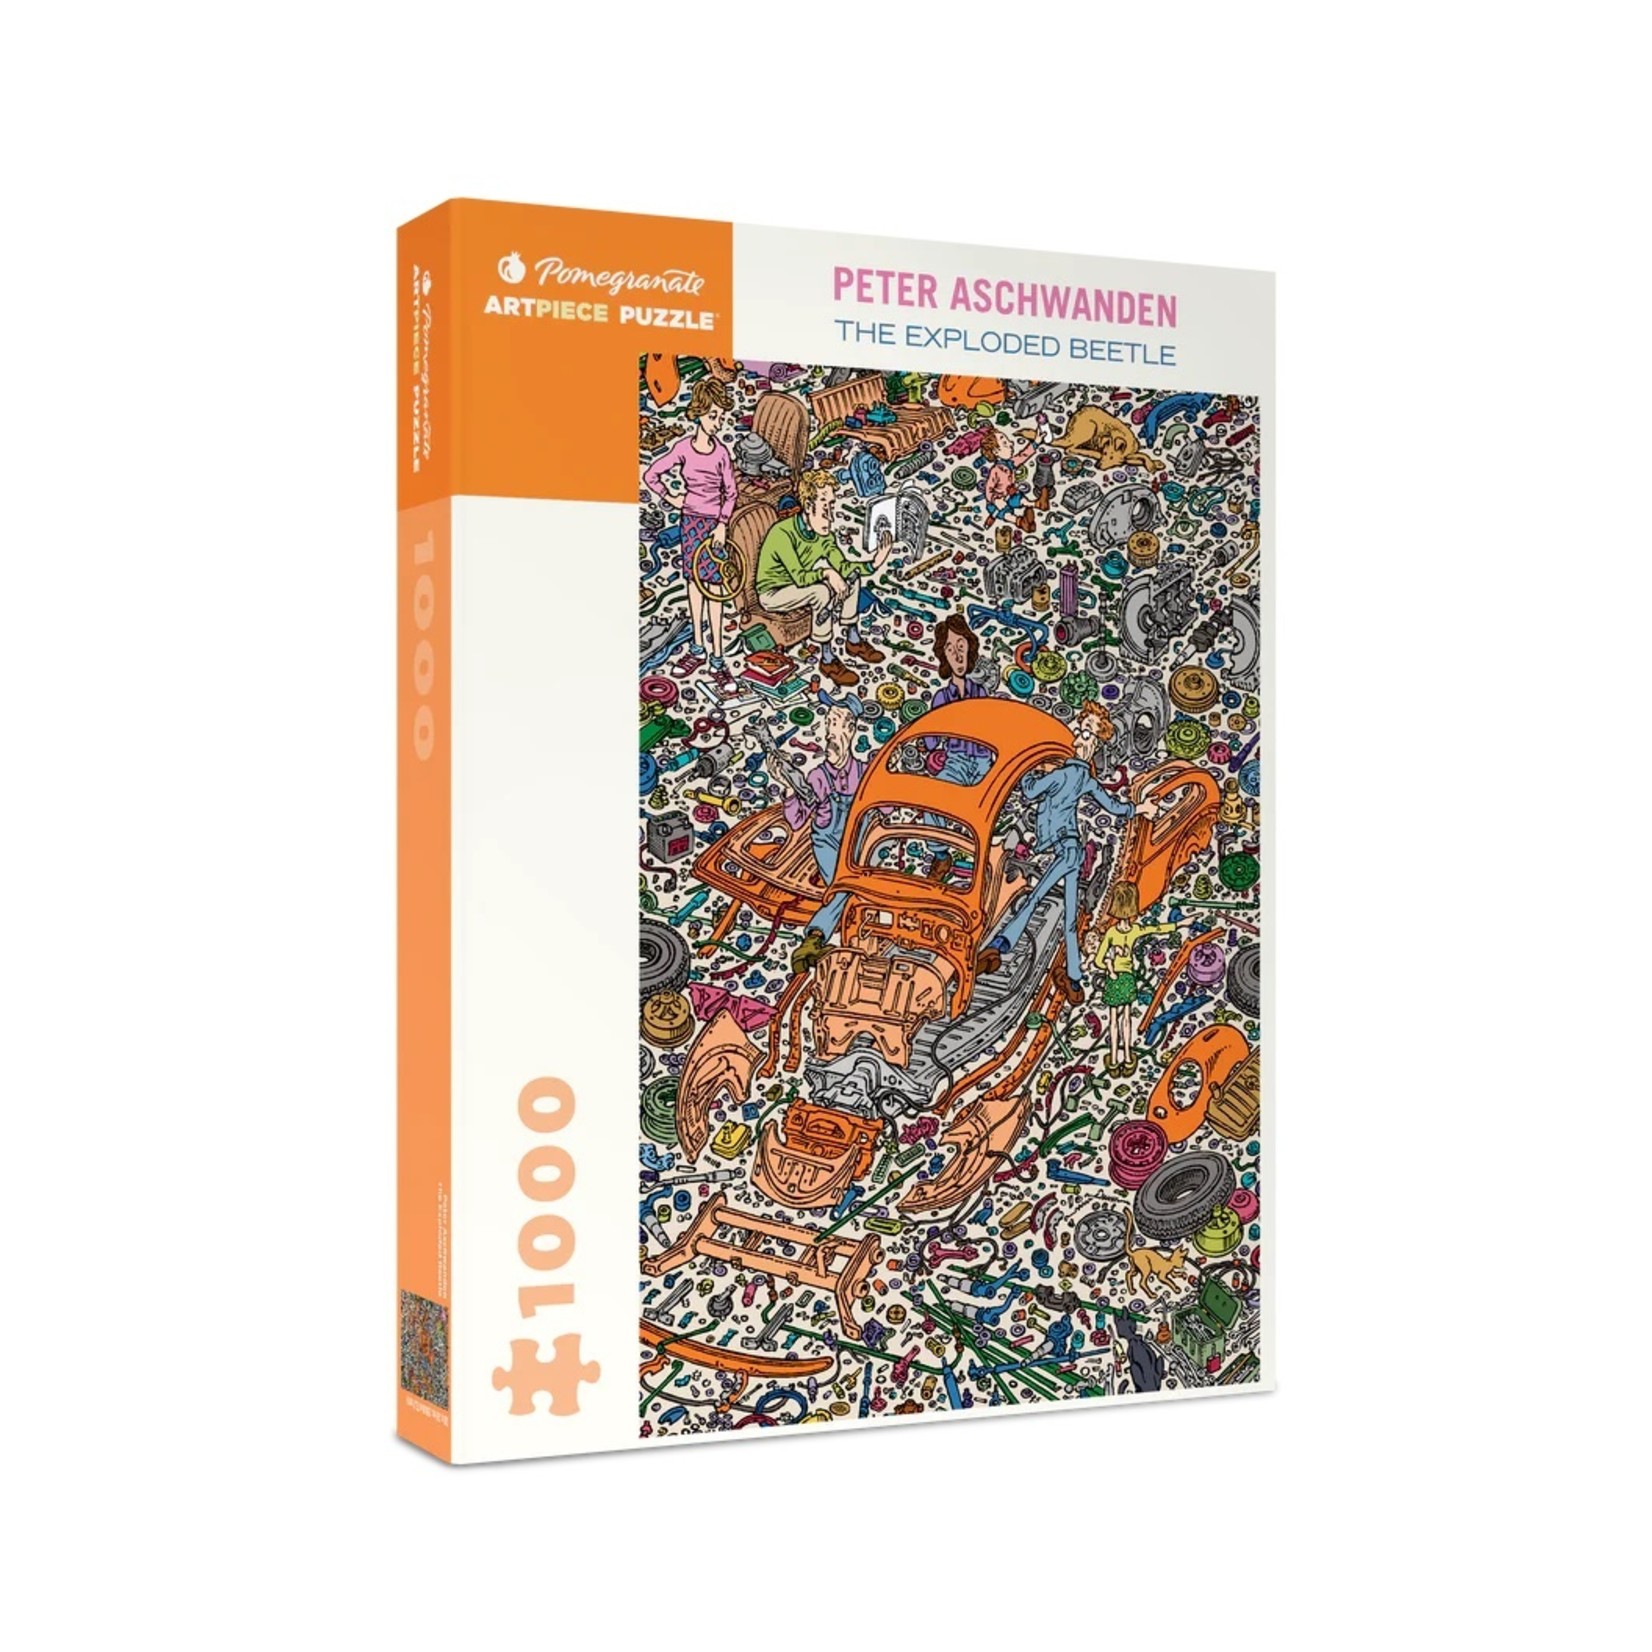 Peter Aschwanden: The Exploded Beetle 1000pc